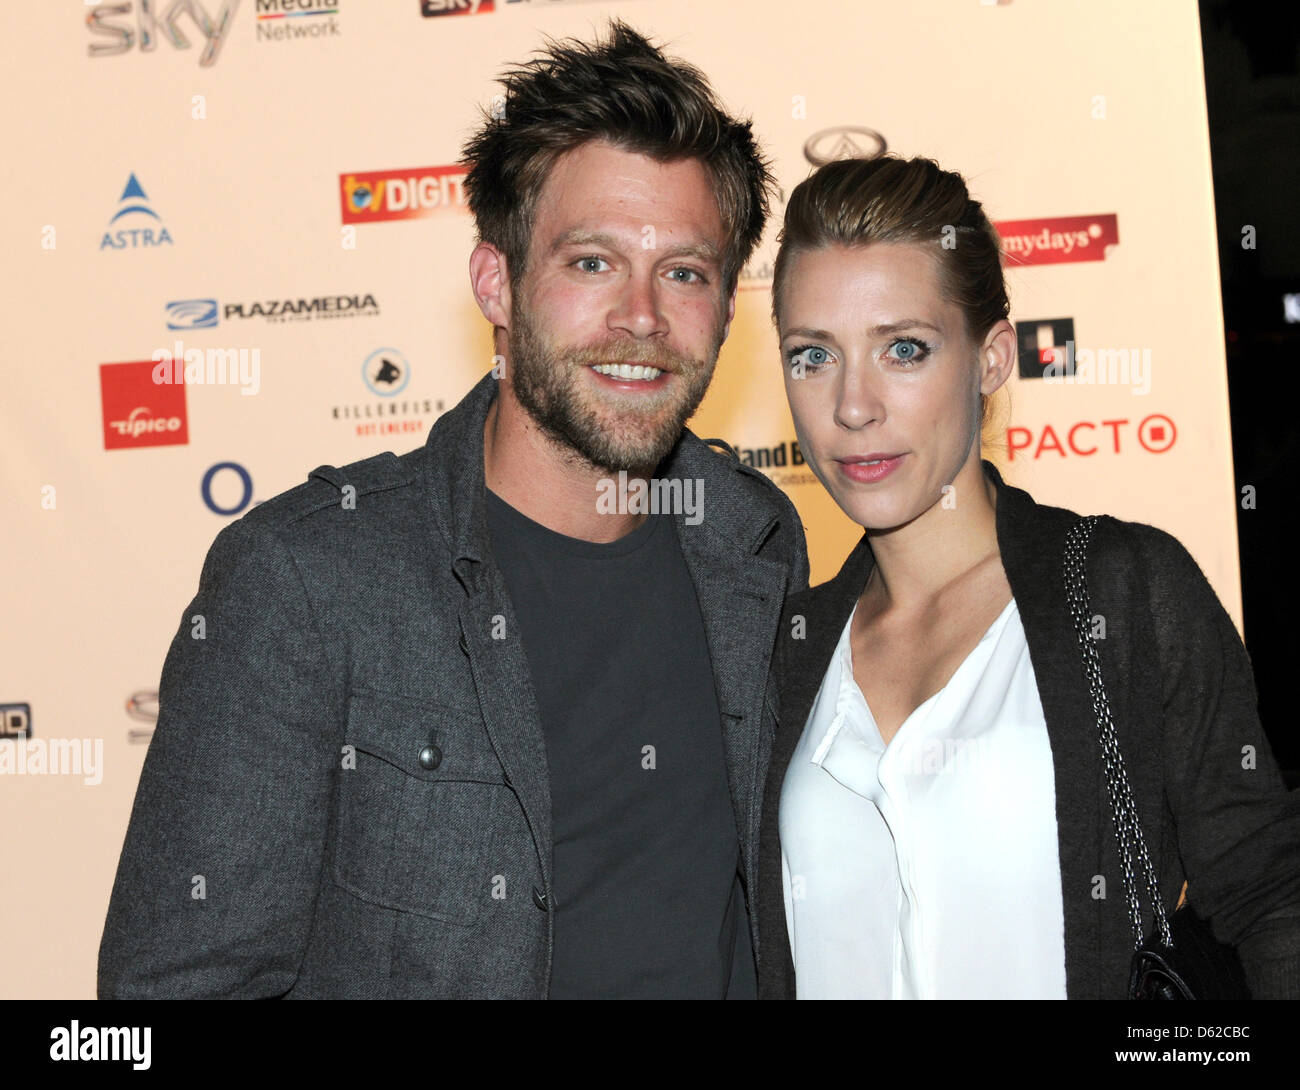 Actor Ken Duken and his wife Marisa arrive at the 'Sky Champions Night'  hosted by boradcaster Sky Deutschland at 'Heart' in Munich, Germany, 18 May  2012. The party was initiated, due to